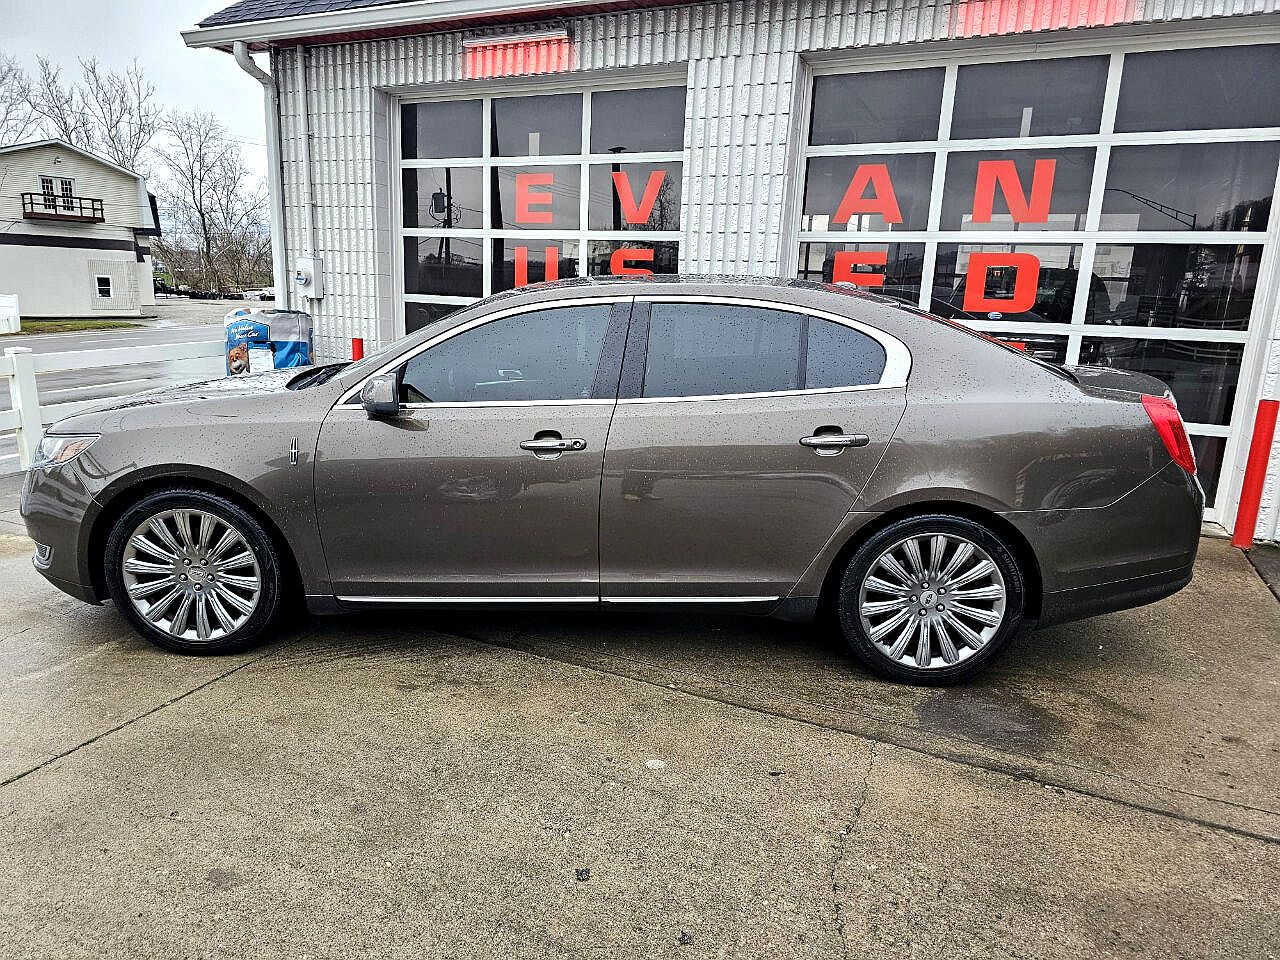 2015 Lincoln MKS null image 14